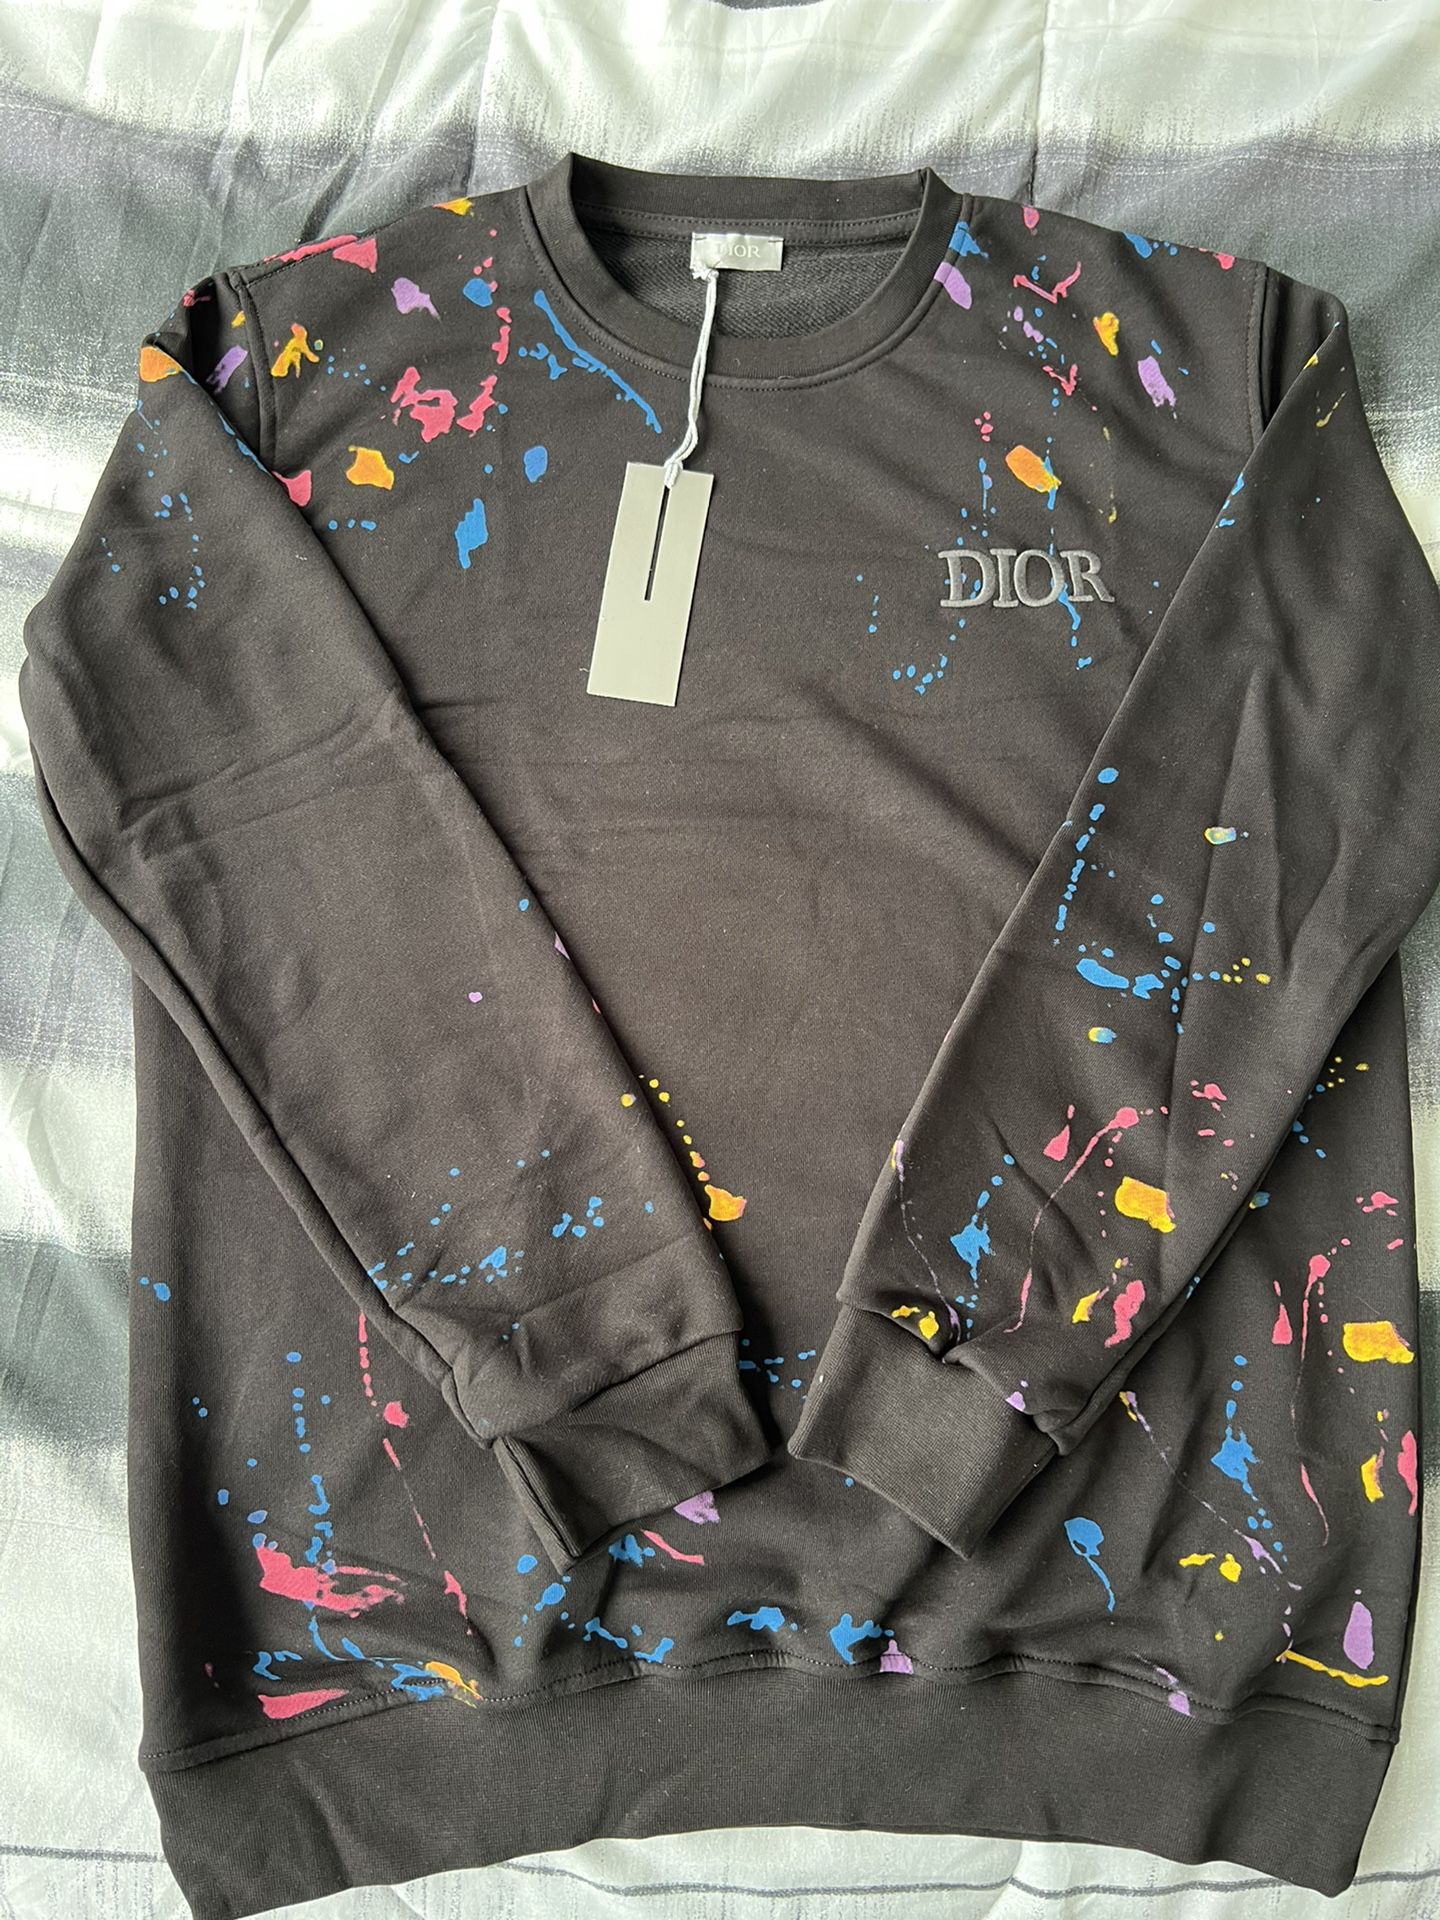 D.ior Sweatshirt . All Sizes Available . Make Reasonable Offer .2  For $180